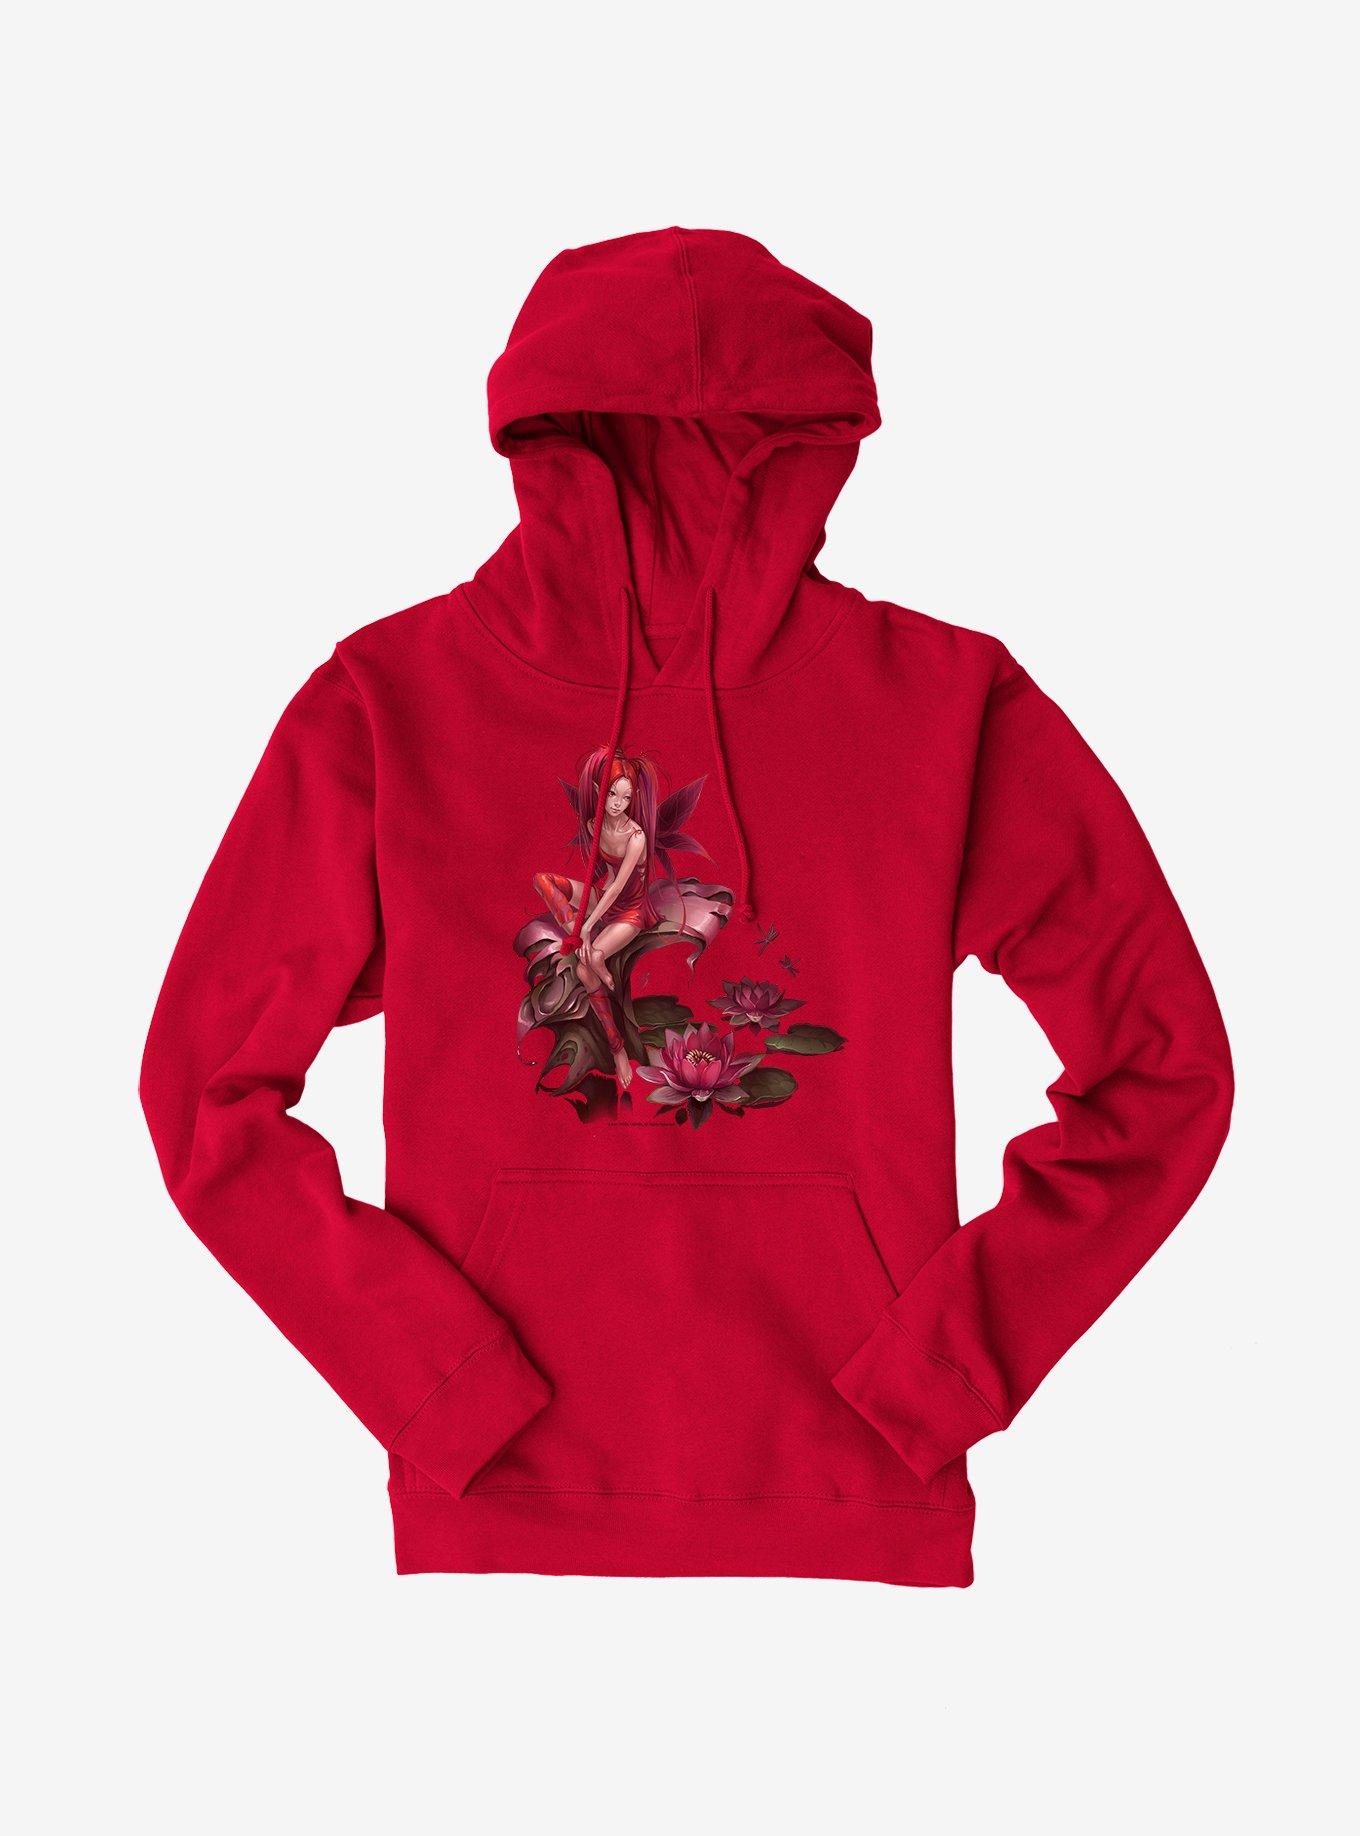 Fairies By Trick Lilypad Fairy Hoodie, RED, hi-res